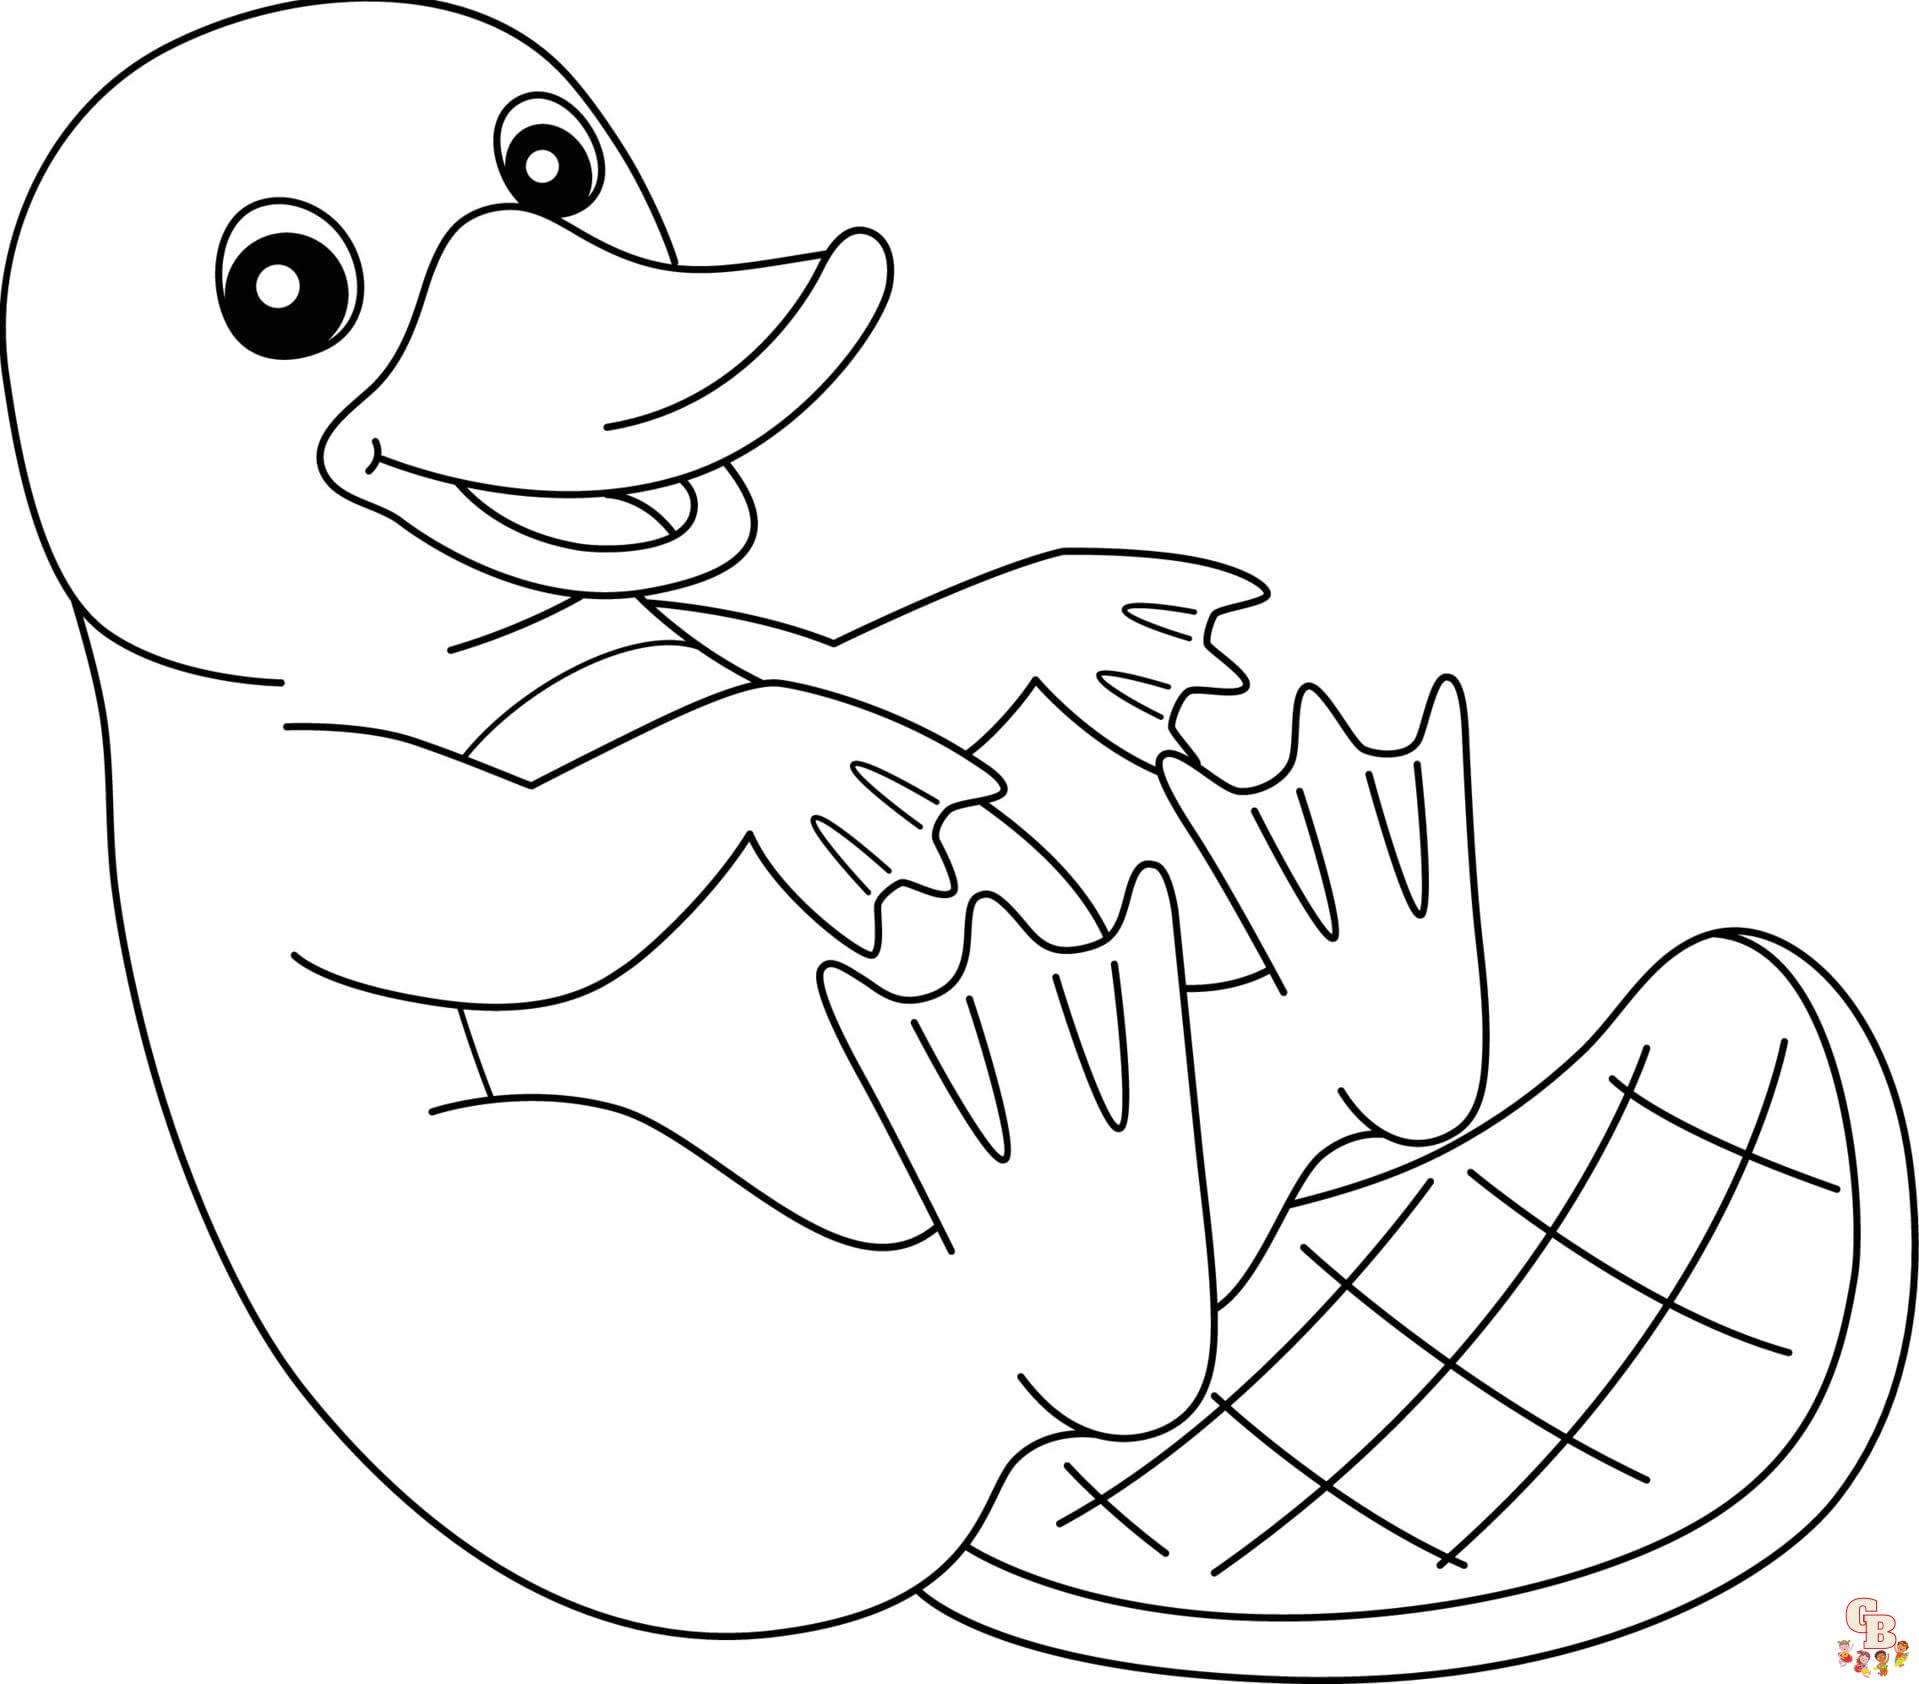 Free Platypus coloring pages for kids